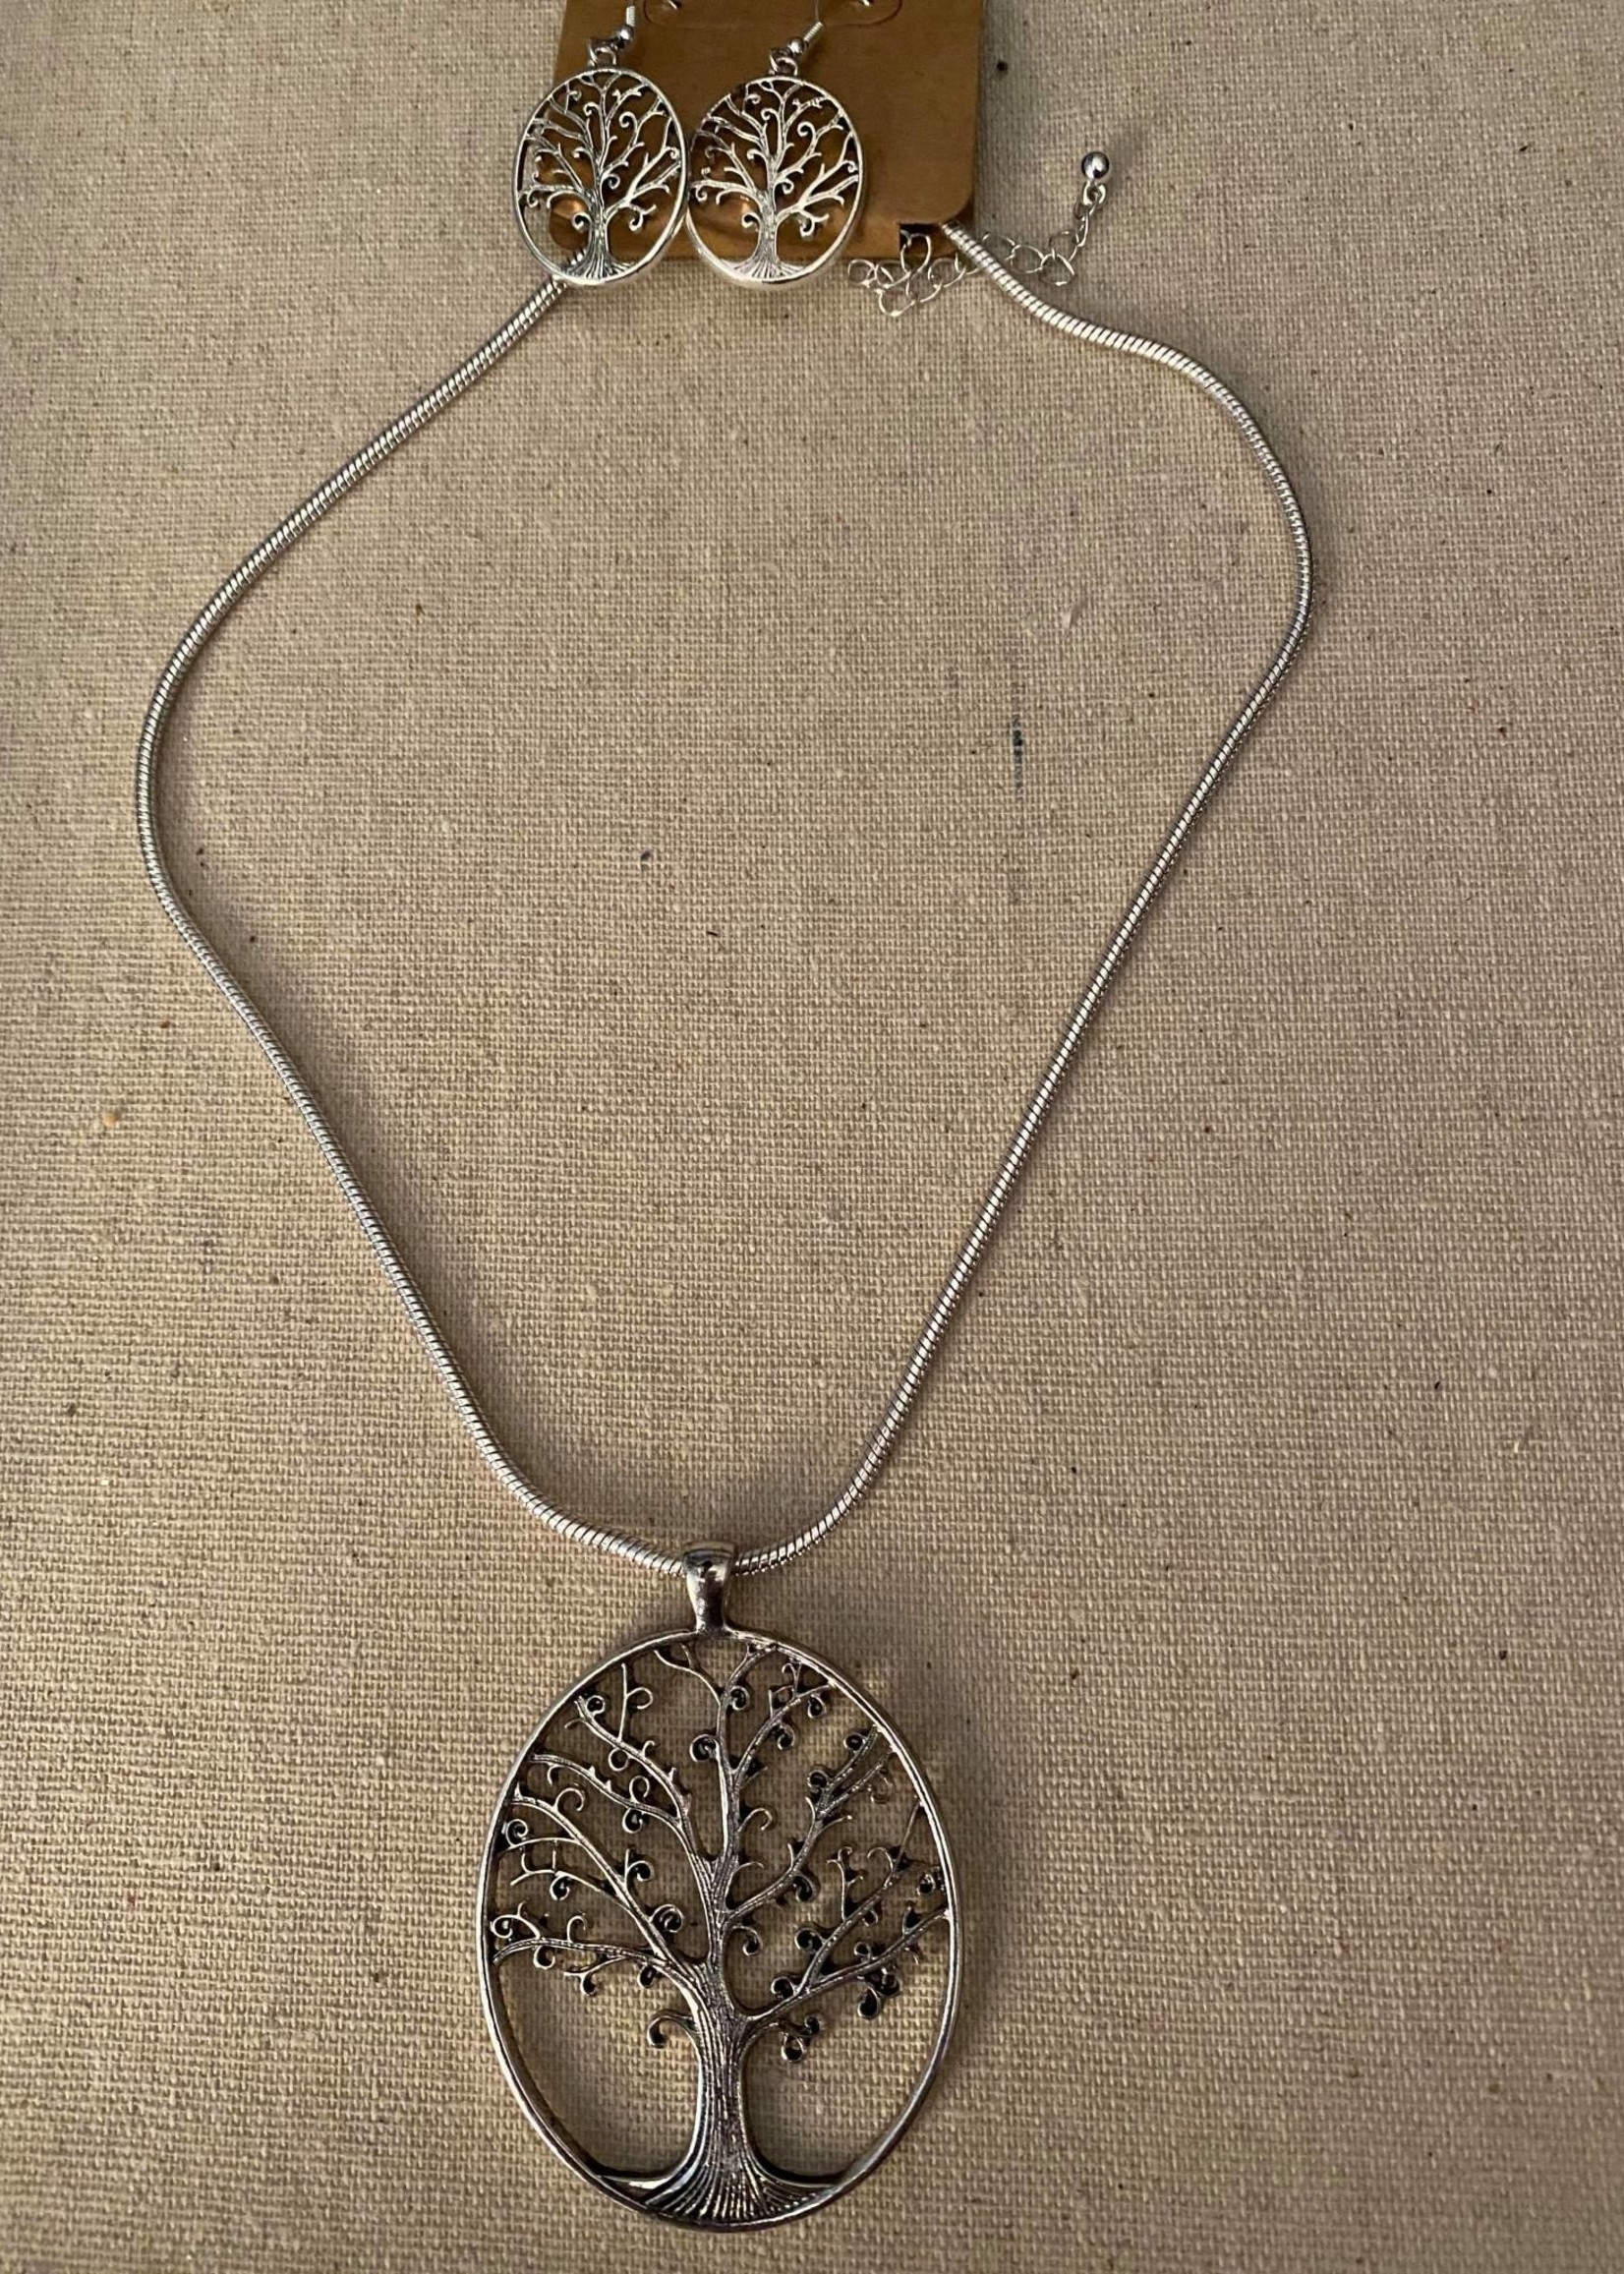 H- Silver tree of life necklace w/earrings